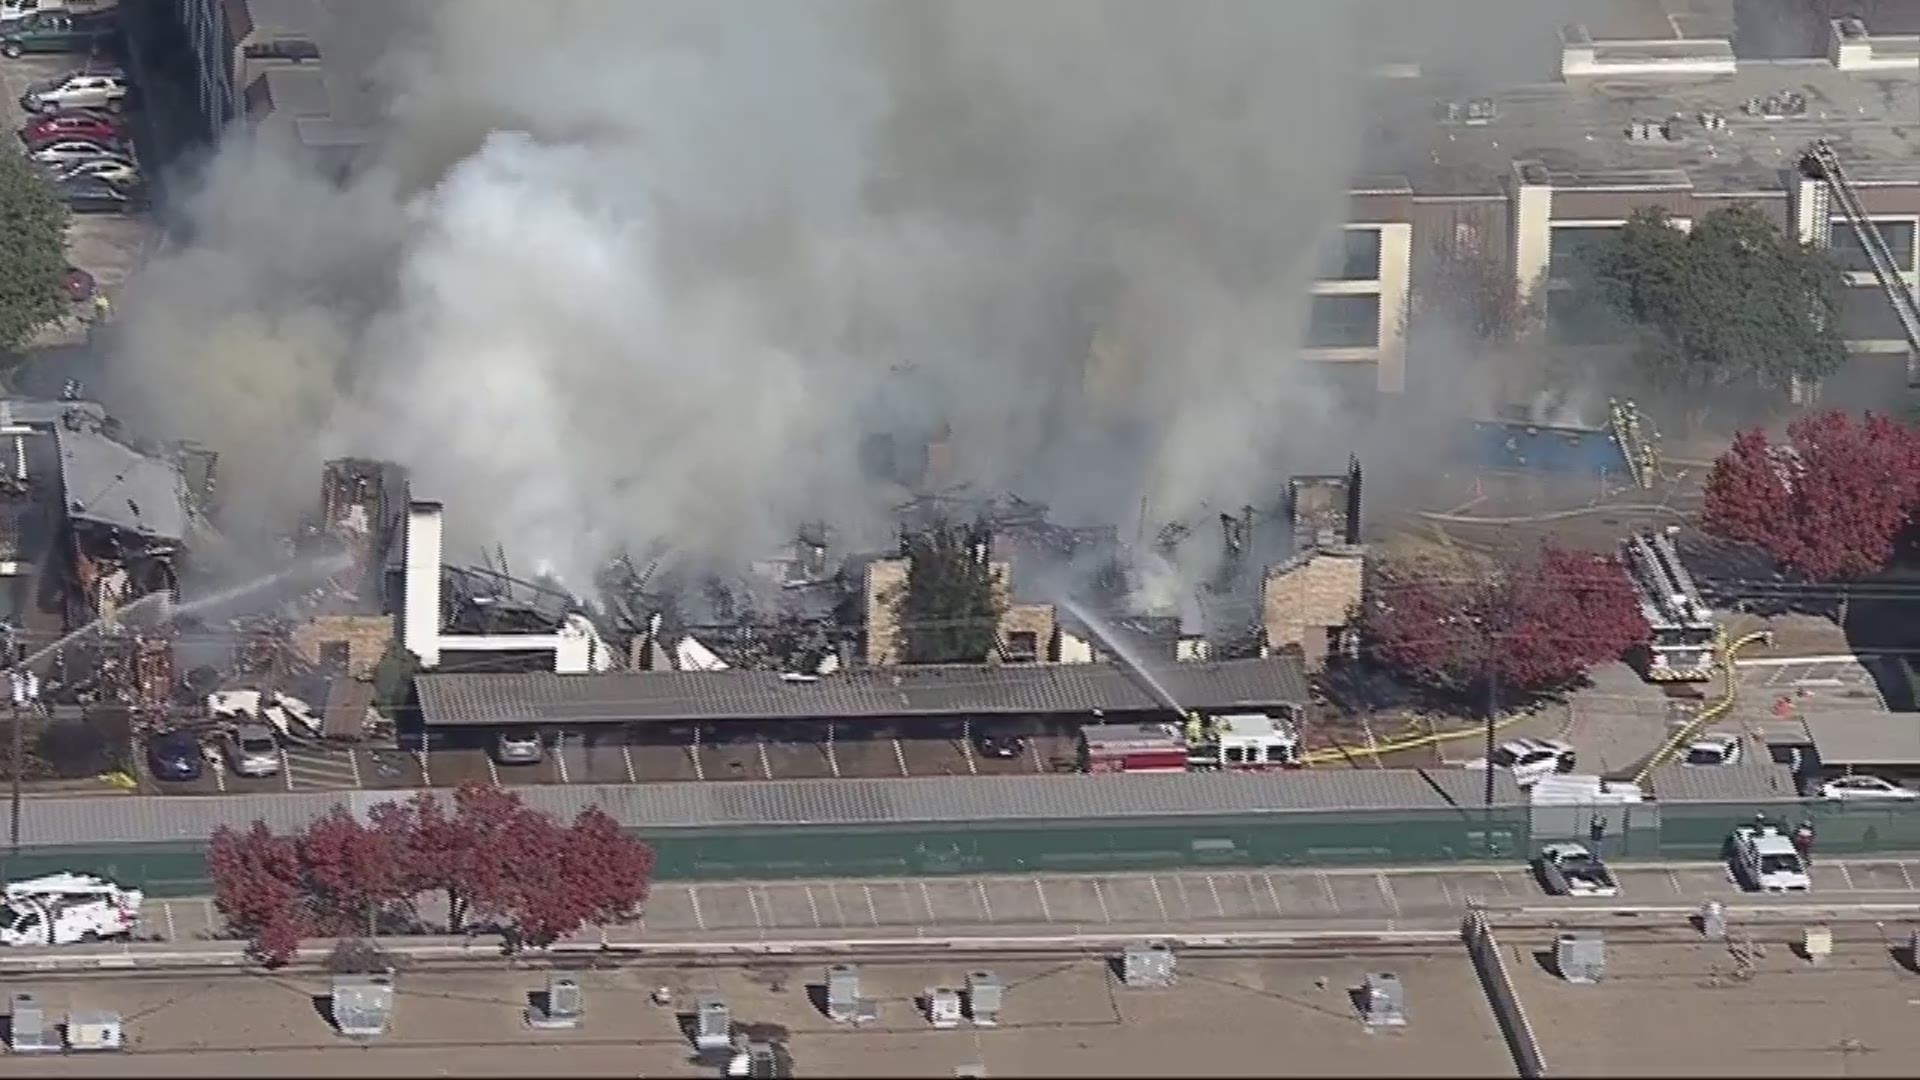 The fire escalated to a four-alarm blaze in the Lake Highlands area of northeast Dallas.